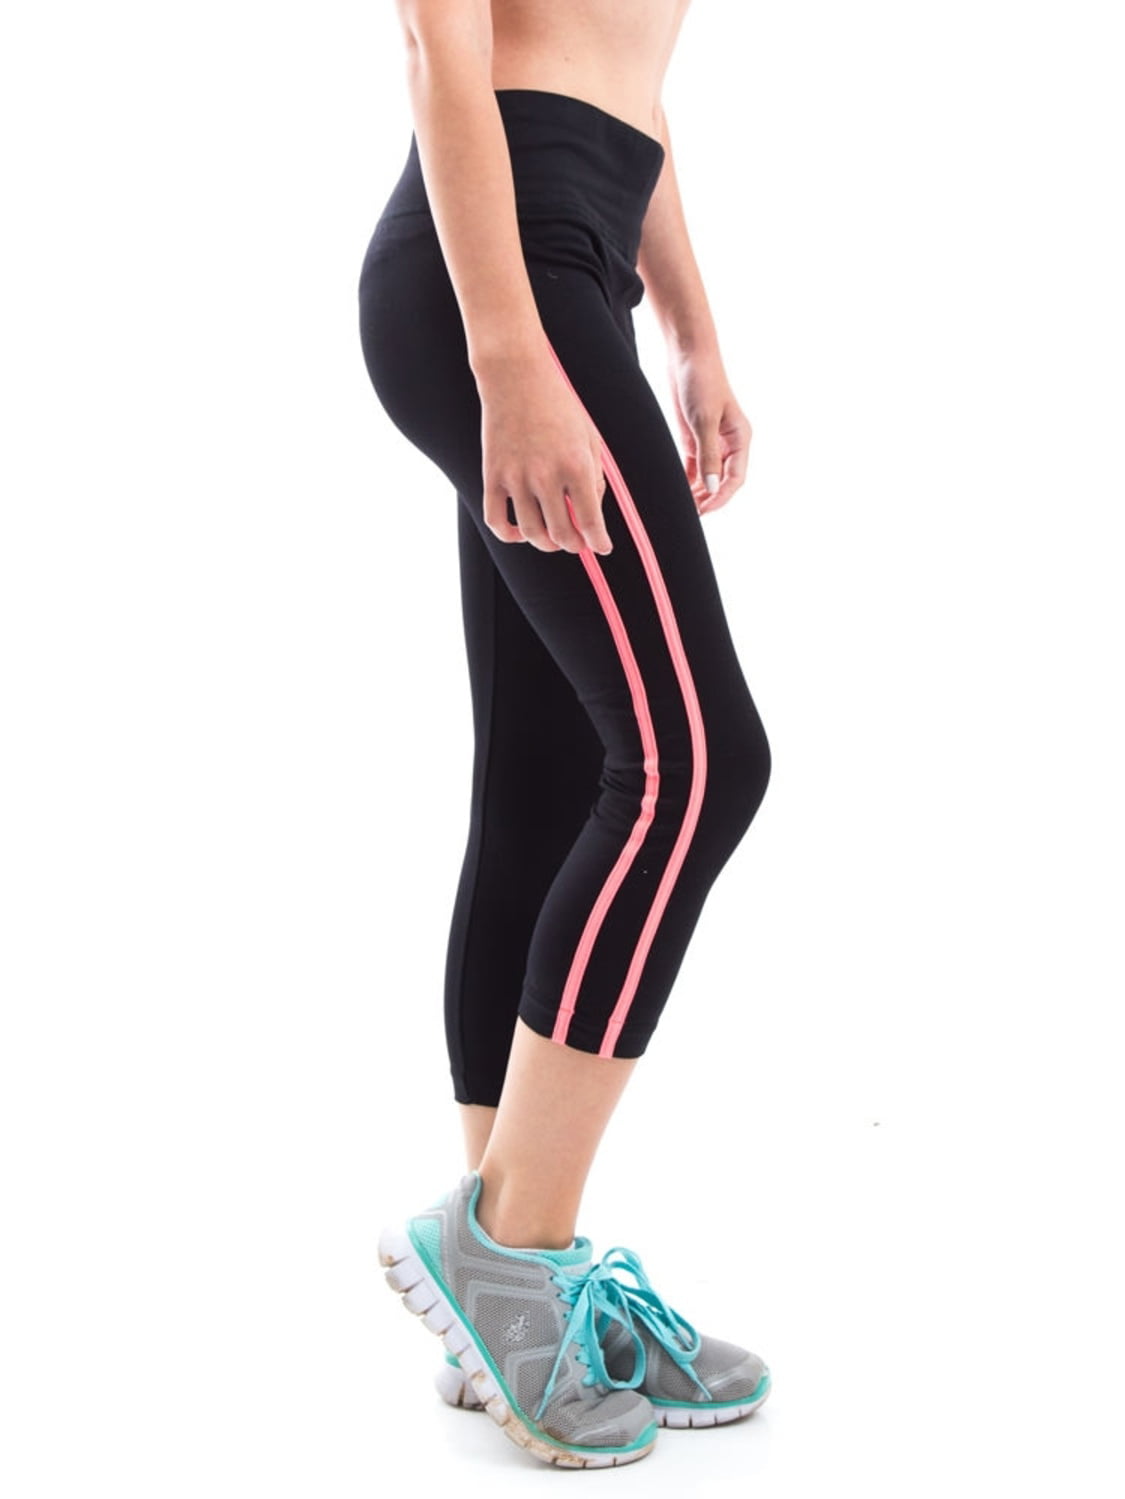 30 Minute Neon workout leggings for push your ABS